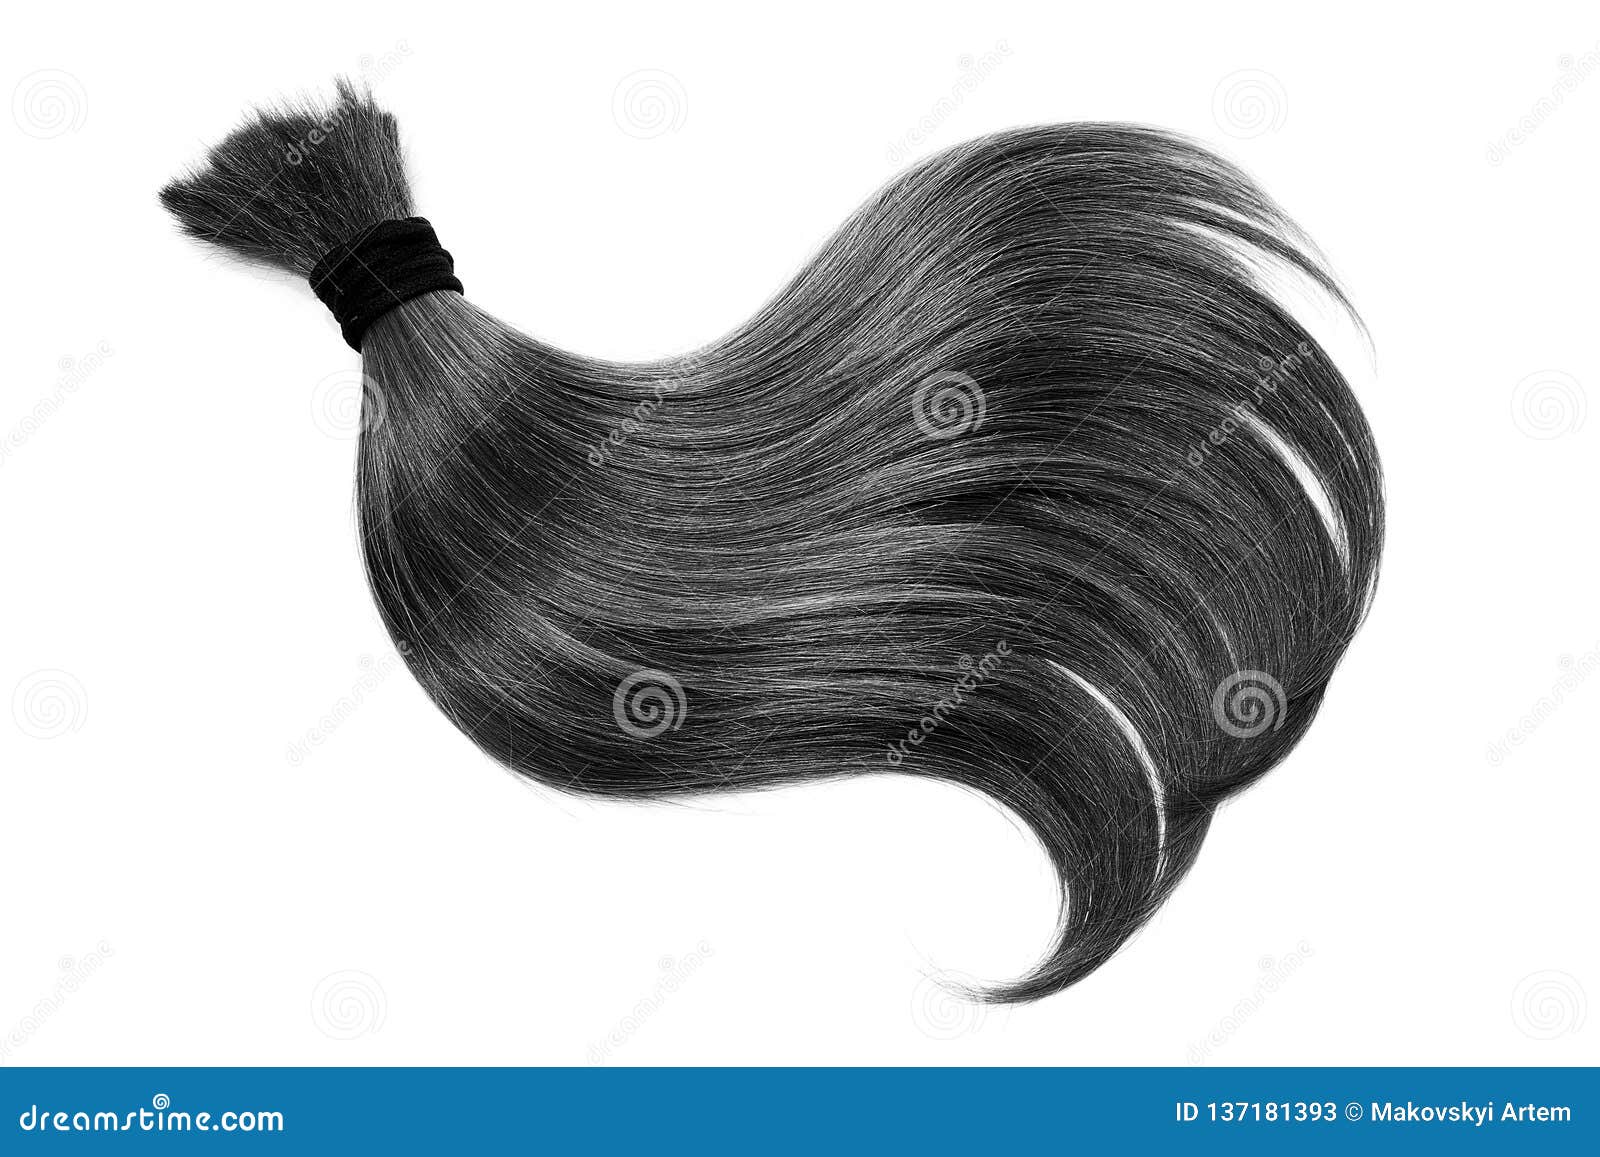 Curl of Natural Black Hair, Isolated on White Background. Ponytail Close Up  Stock Image - Image of colours, natural: 137181393